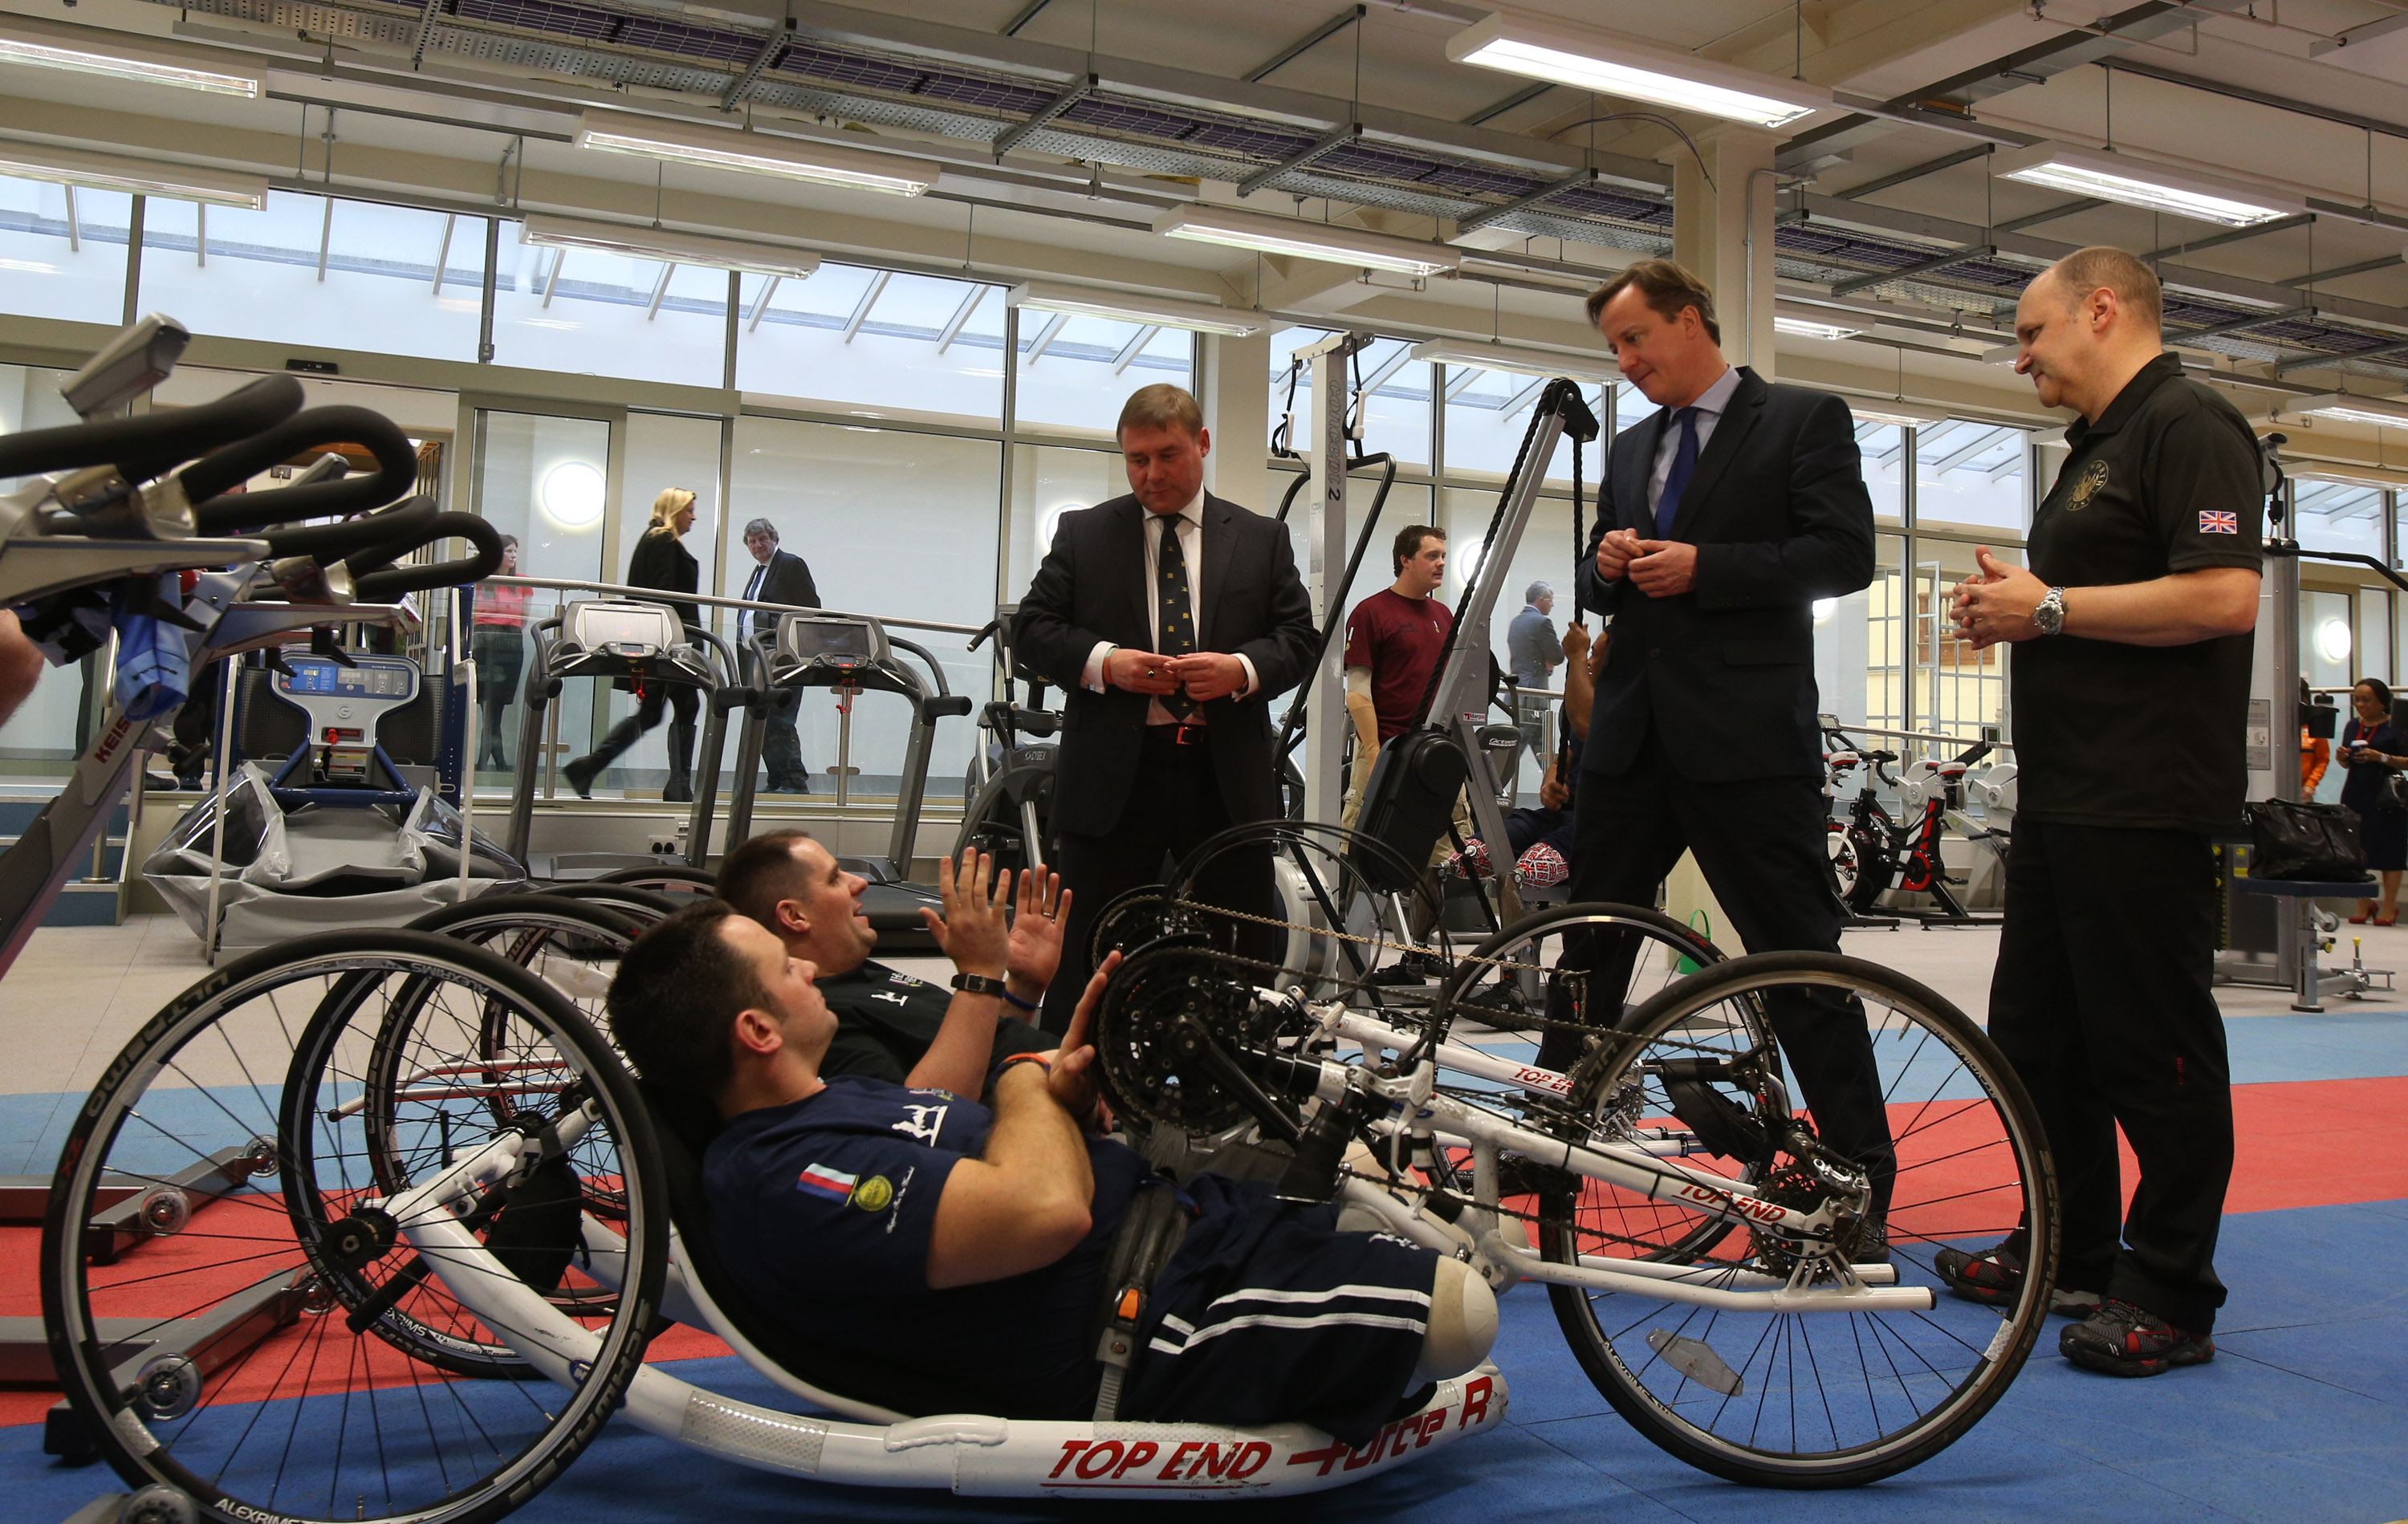 Wounded servicemen Simon Harmer and Steve Arnold with British PM David Cameron